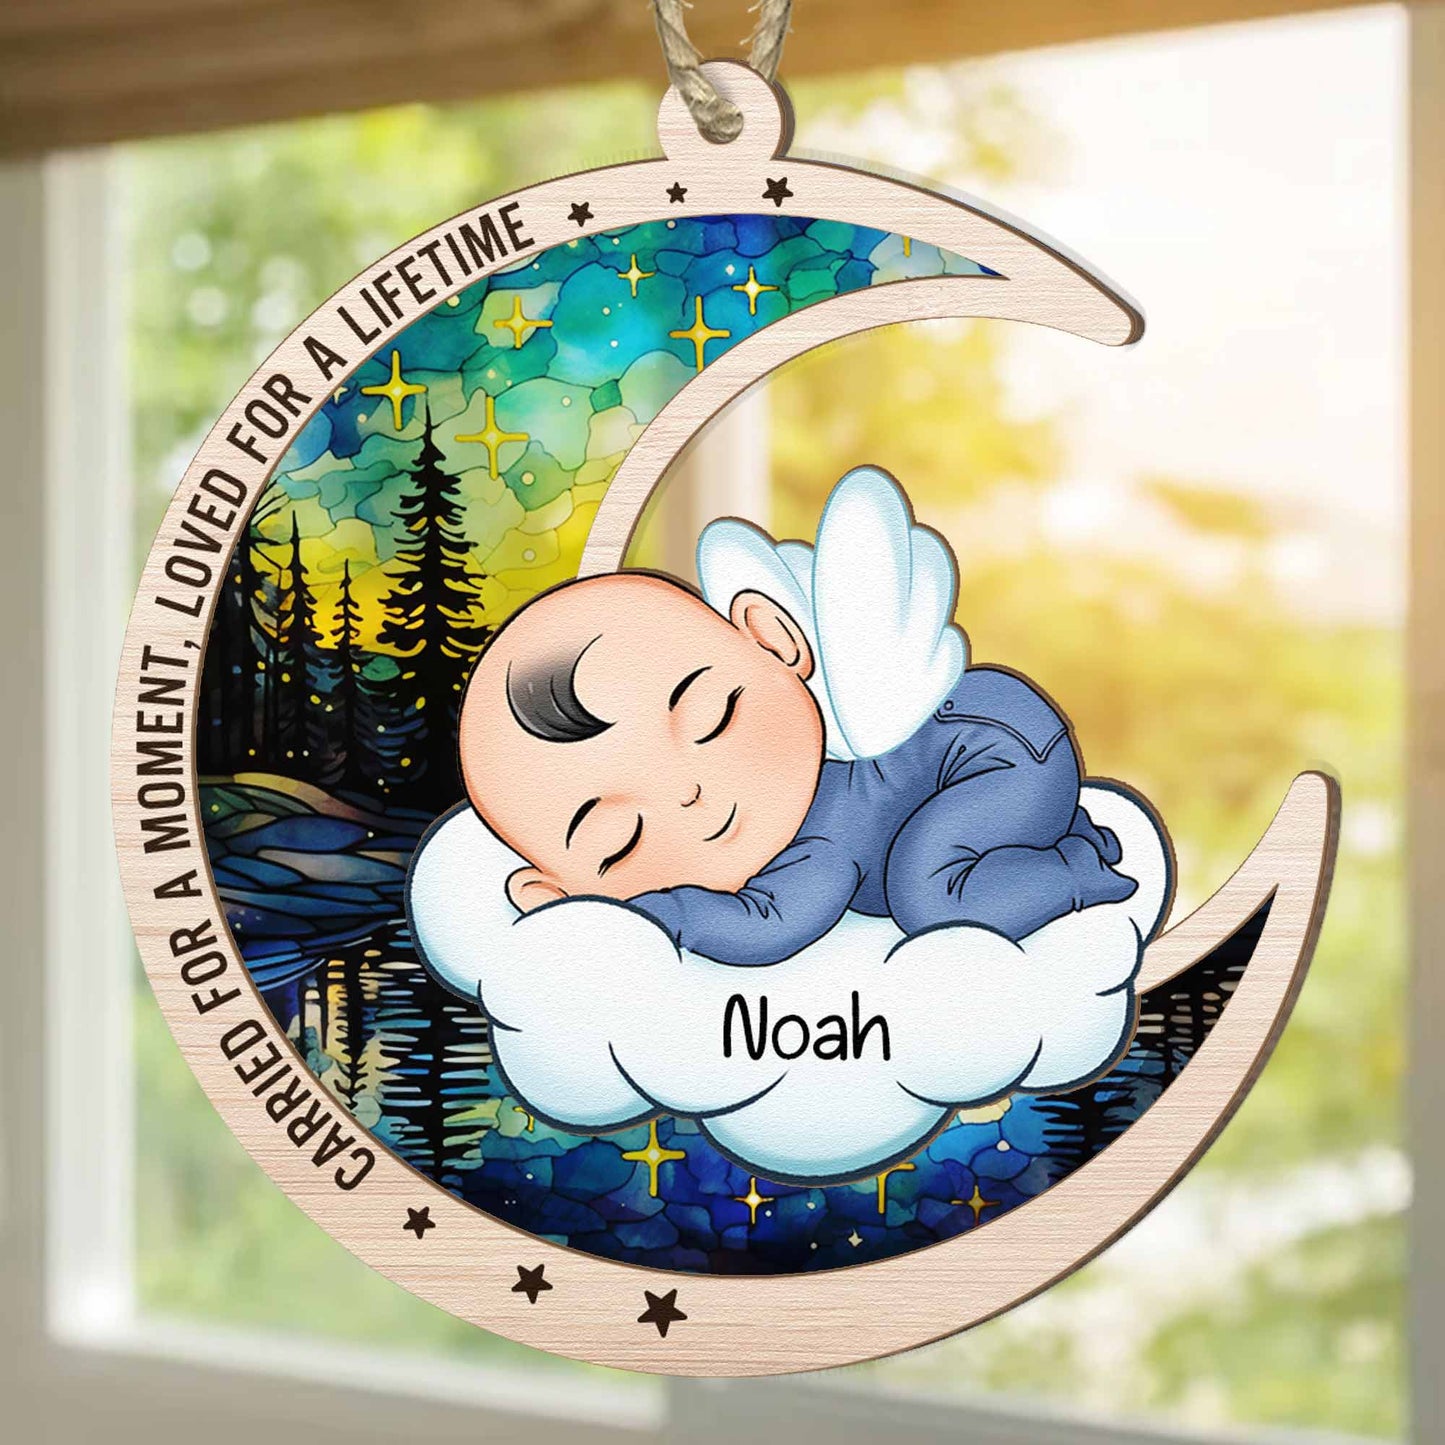 Carried For A Moment, Loved For A Lifetime - Personalized Suncatcher Ornament